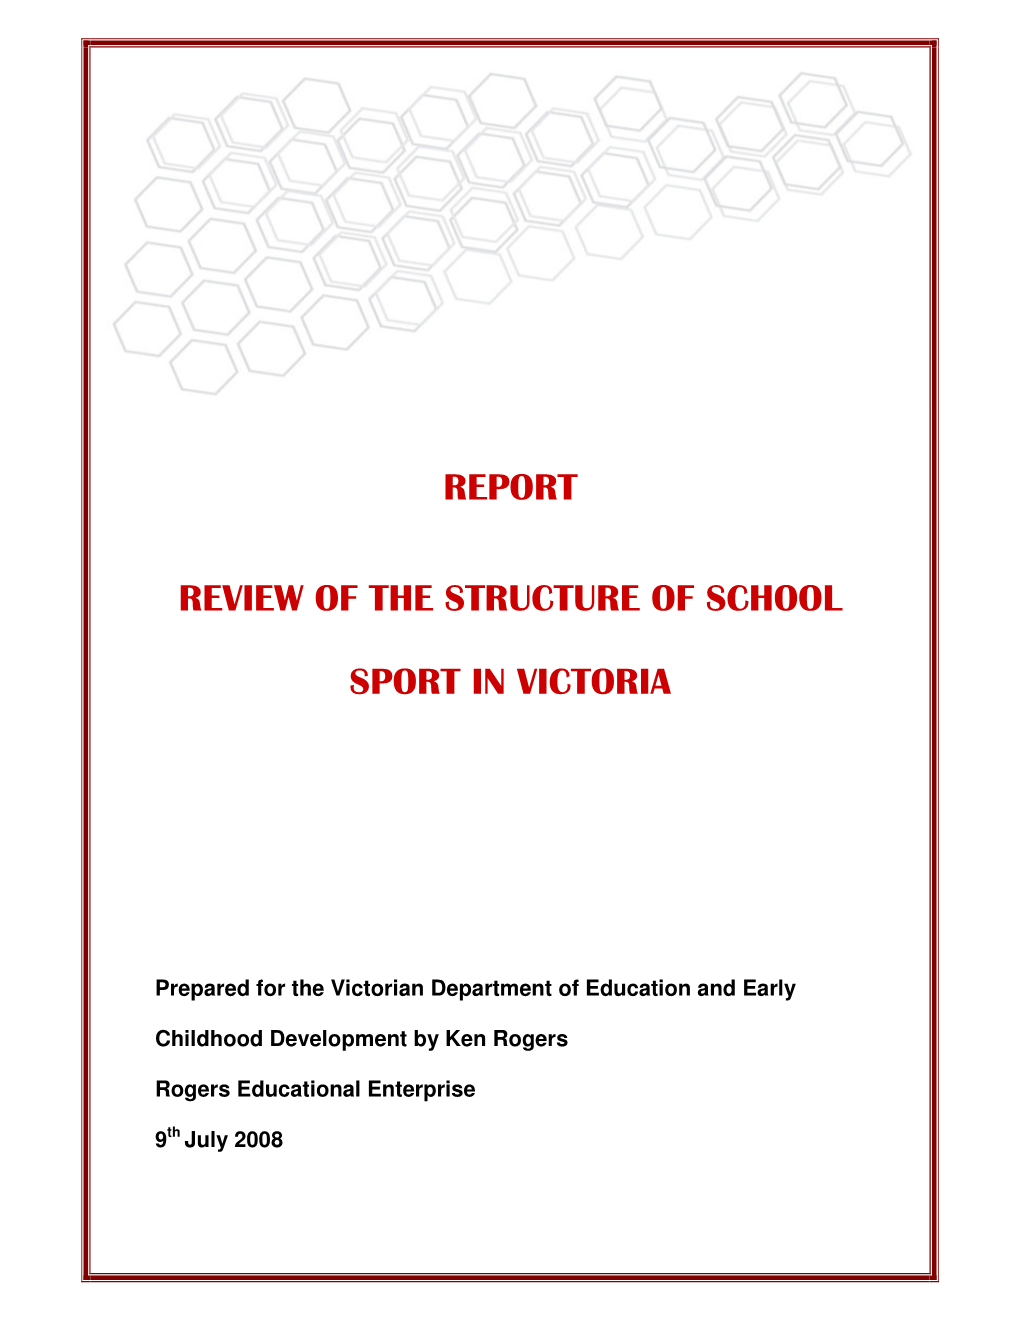 Report Review of the Structure of School Sport